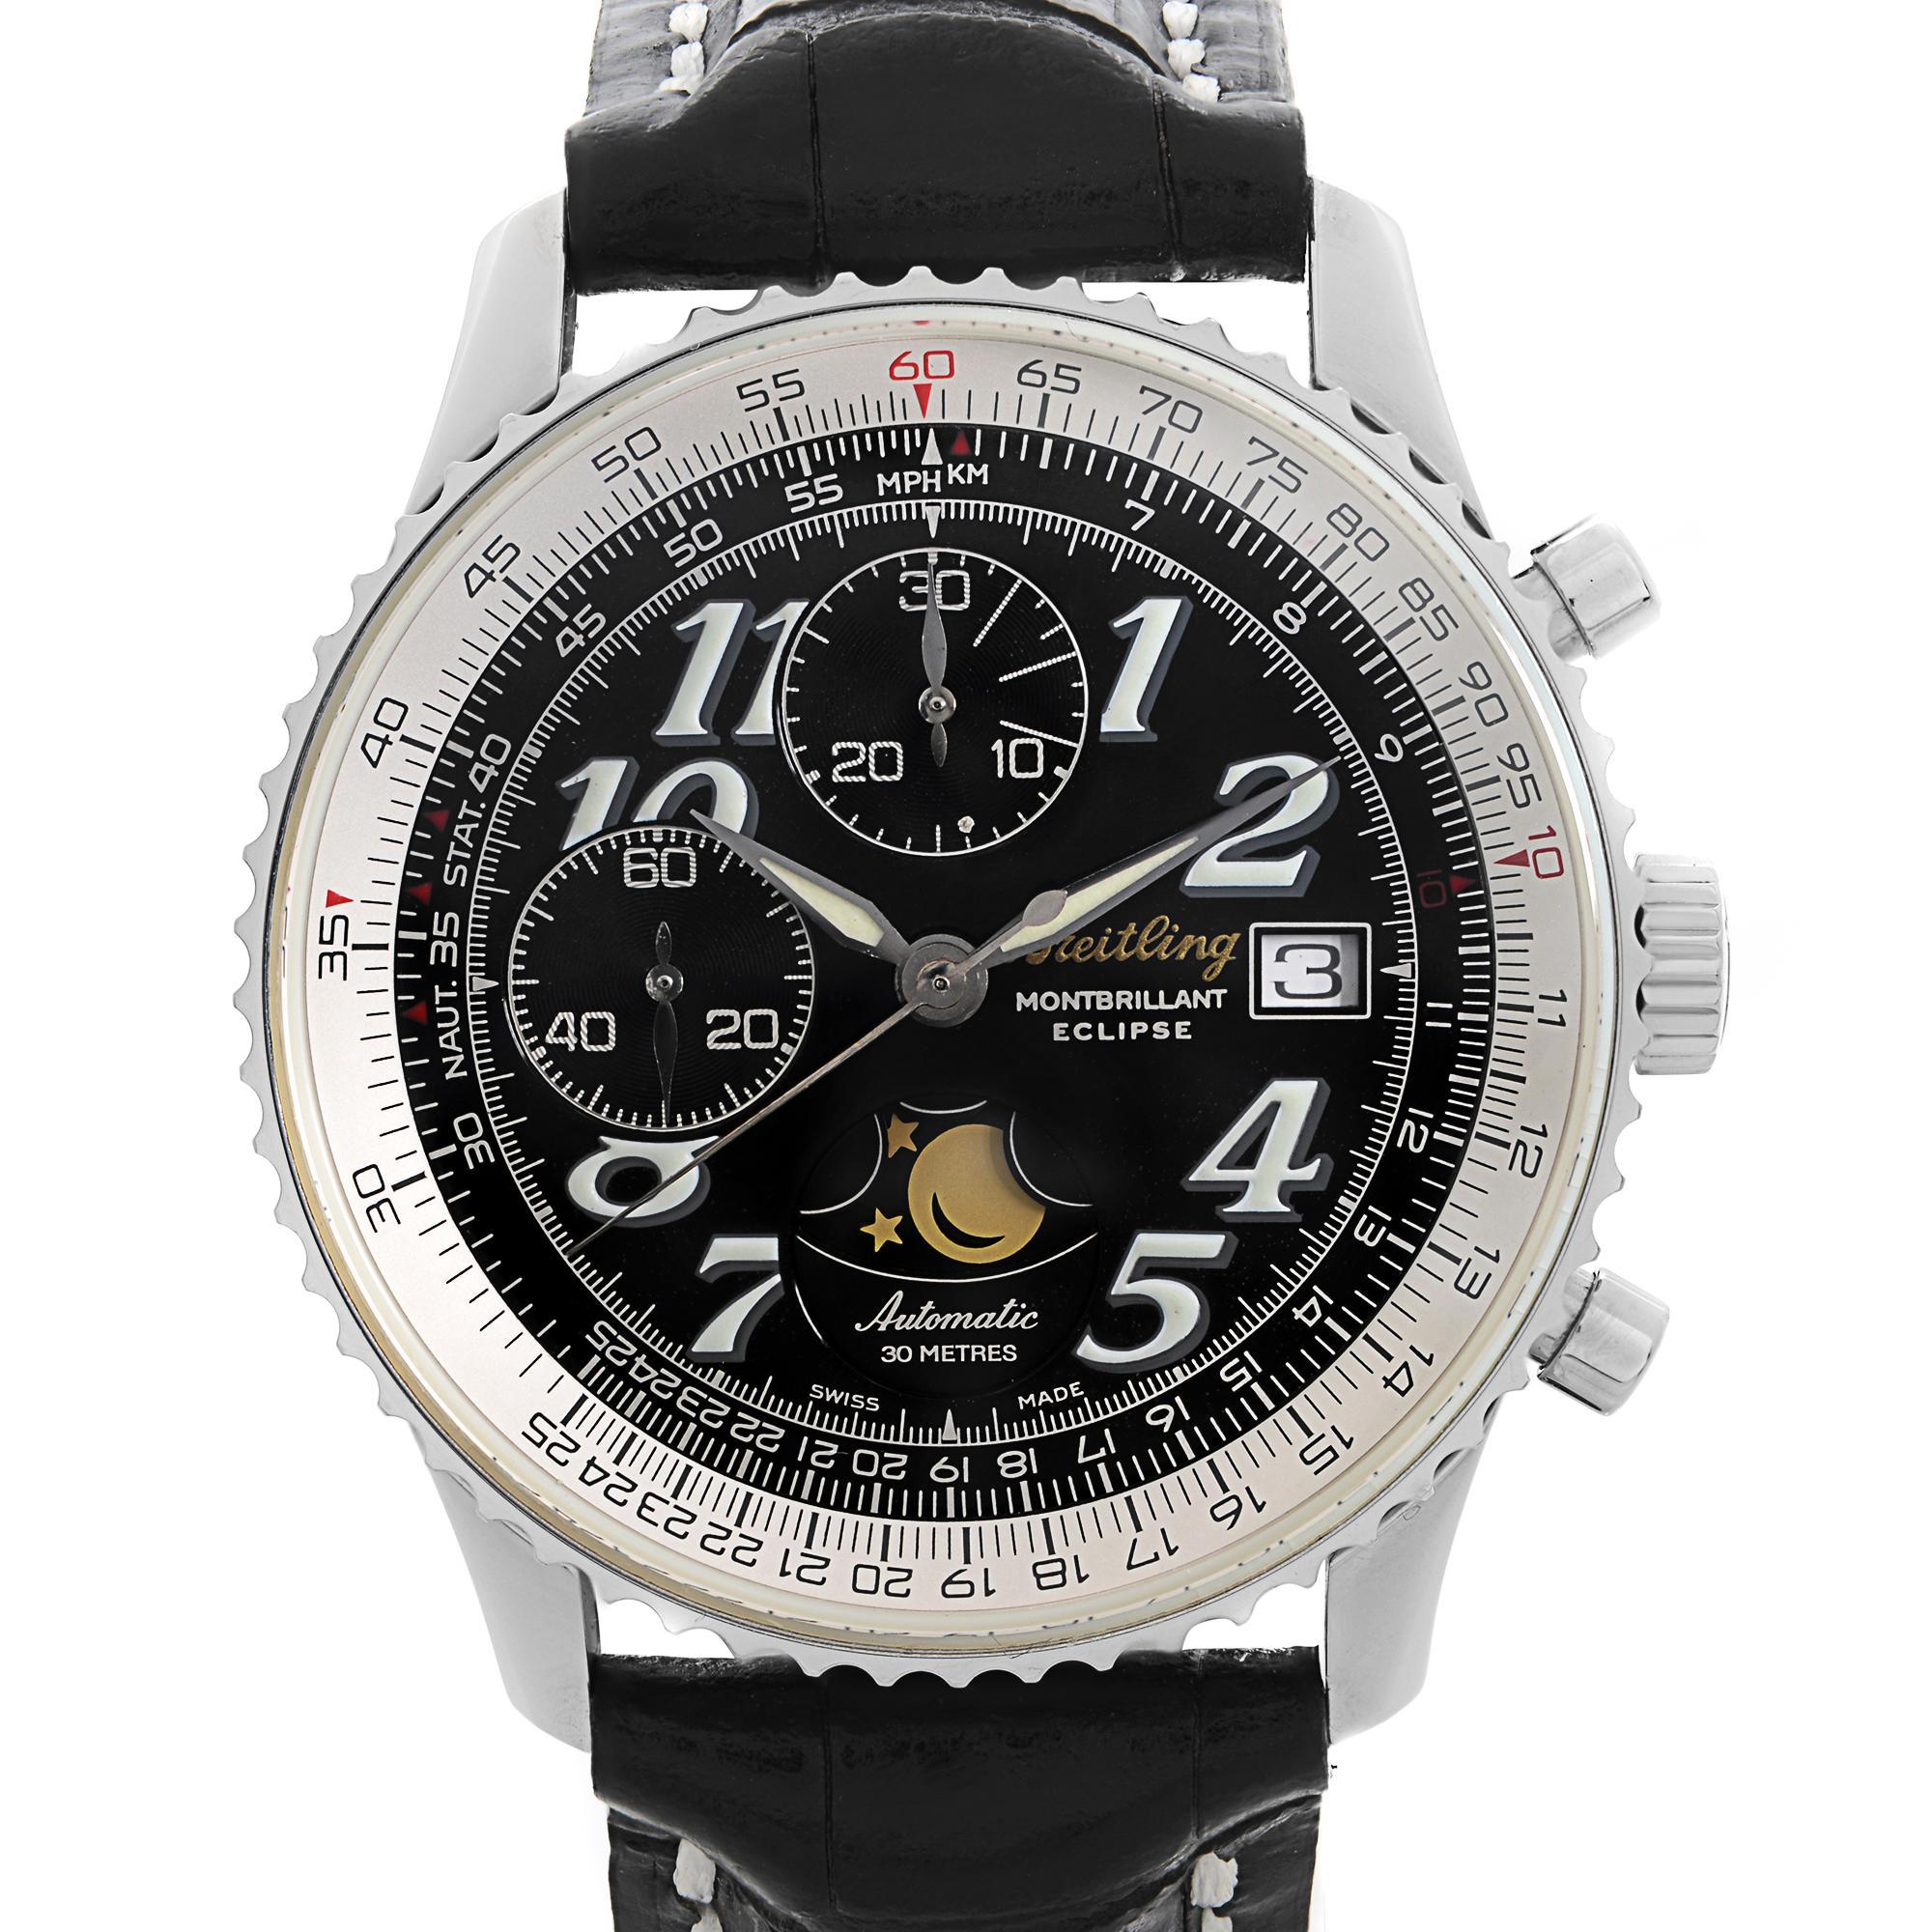 Pre-Owned Breitling Montbrillant Eclipse Steel Black Dial Automatic Men's Watch A43030. Comes with a custom non-Breitling leather strap. Has some patina on the dial. This Beautiful Men's Timepiece is Powered by a Mechanical (Automatic) Movement and